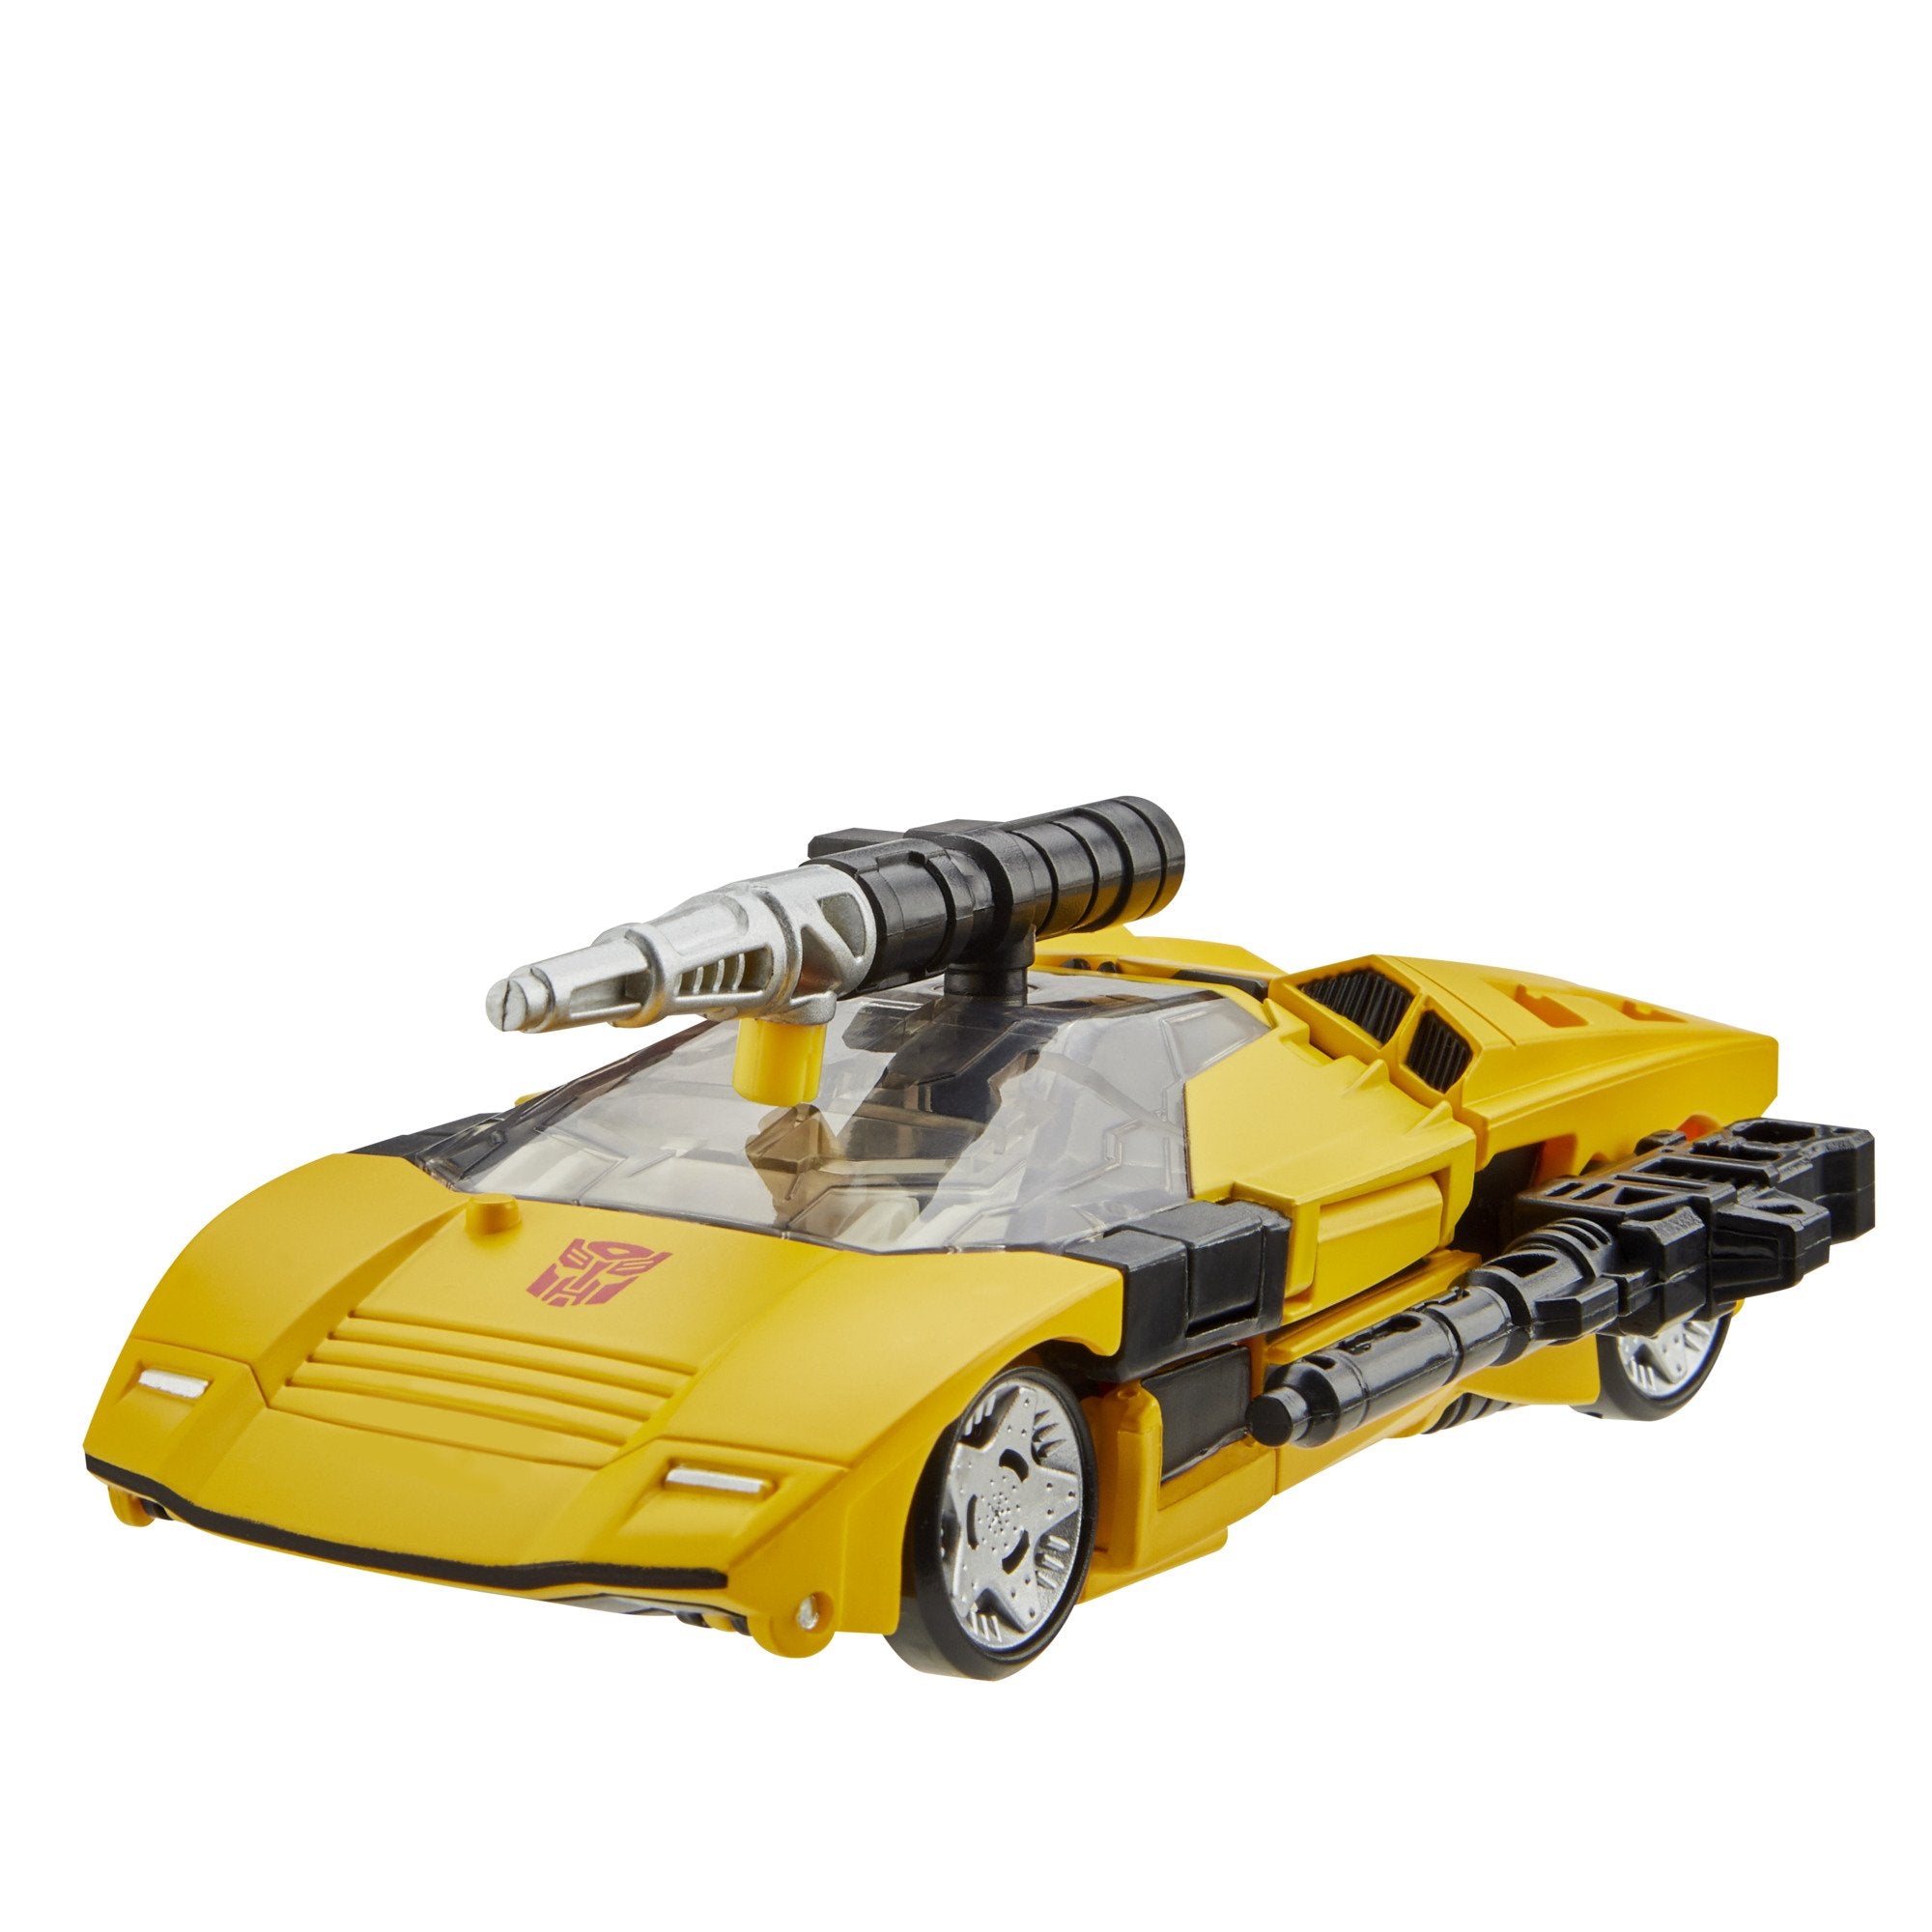 Hasbro - Transformers Generations Selects - Deluxe Autobot Tigertrack - Marvelous Toys